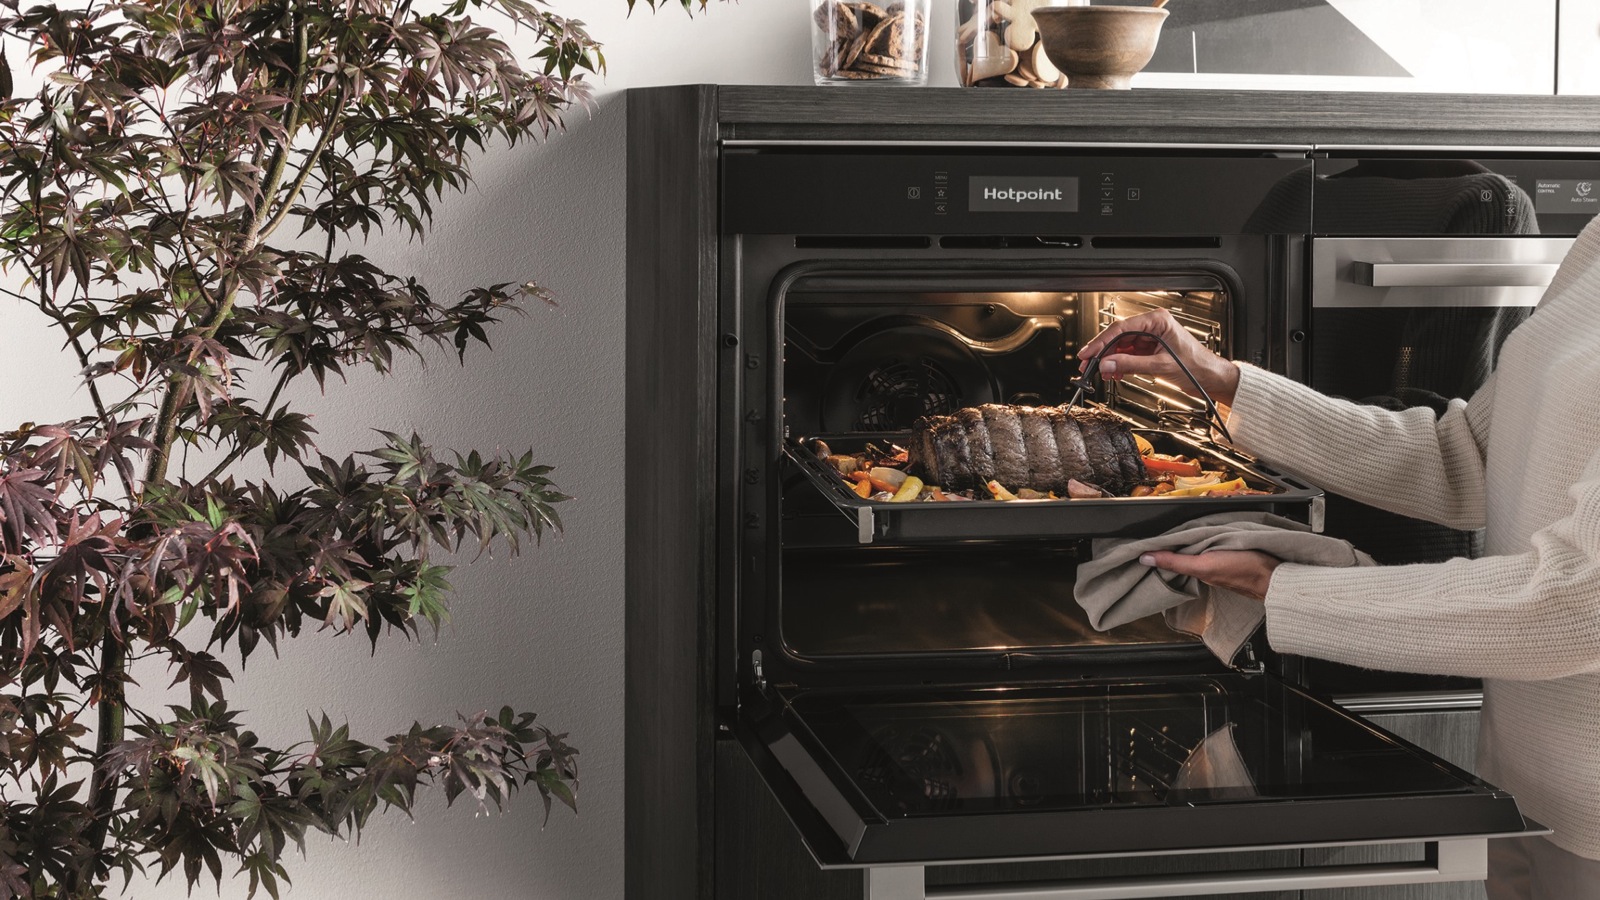 Built-in ovens: The joy of being single